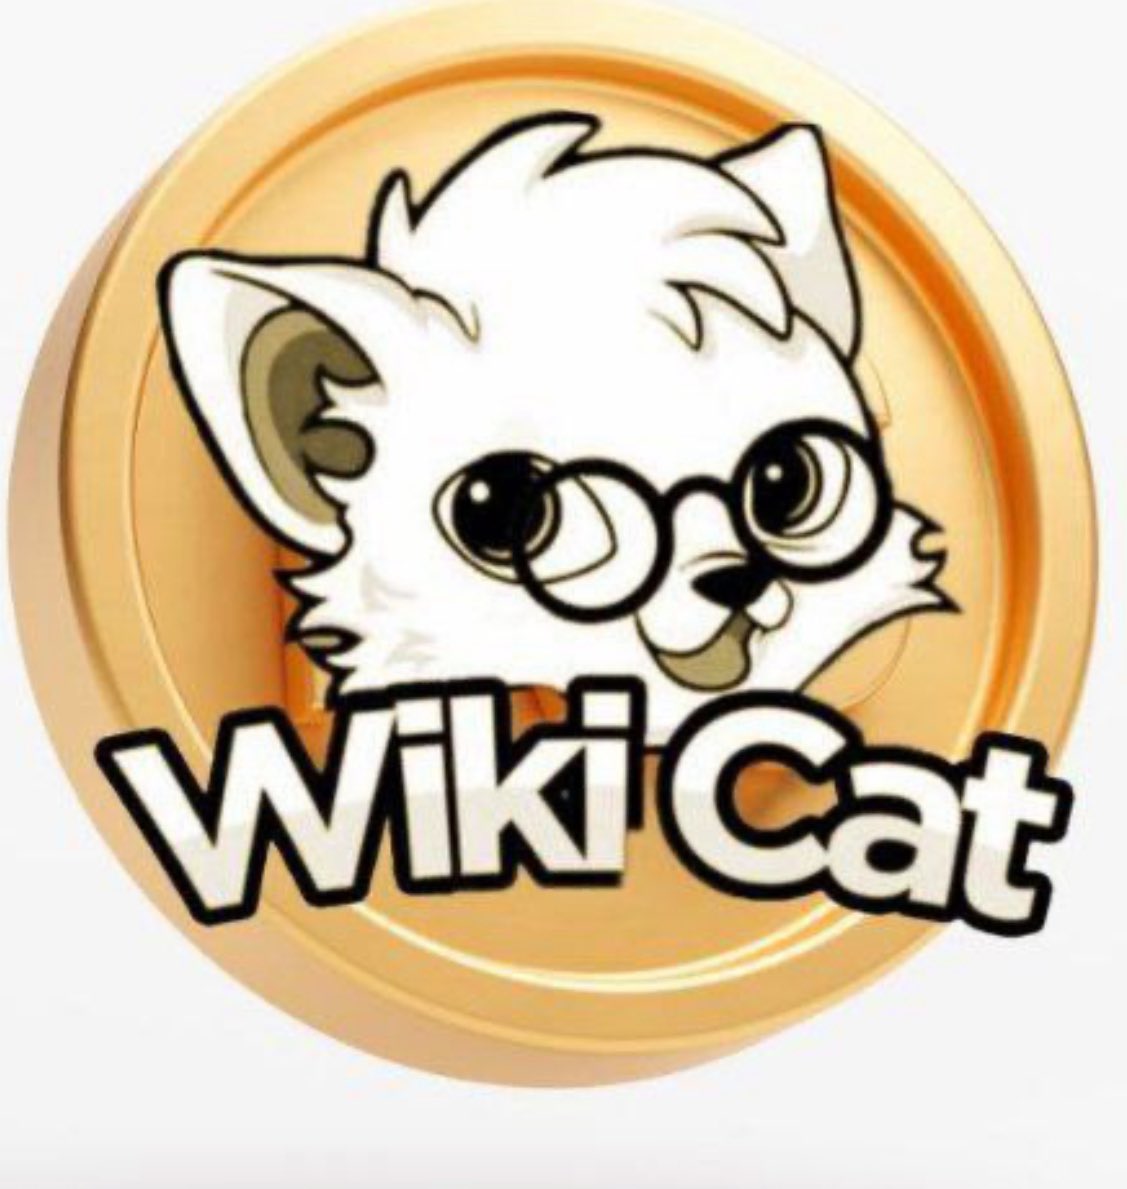 @AltGemHunter Look no further than @WikiCatCoin 🚀💹

  🤲 Hold onto your $WKC 🐾  cos  it's the  ultimate  ticket 🧏🏽 to yr financial freedom! 🎫 #WIKICAT @sirmapy @Smcdao @AltGemHunter